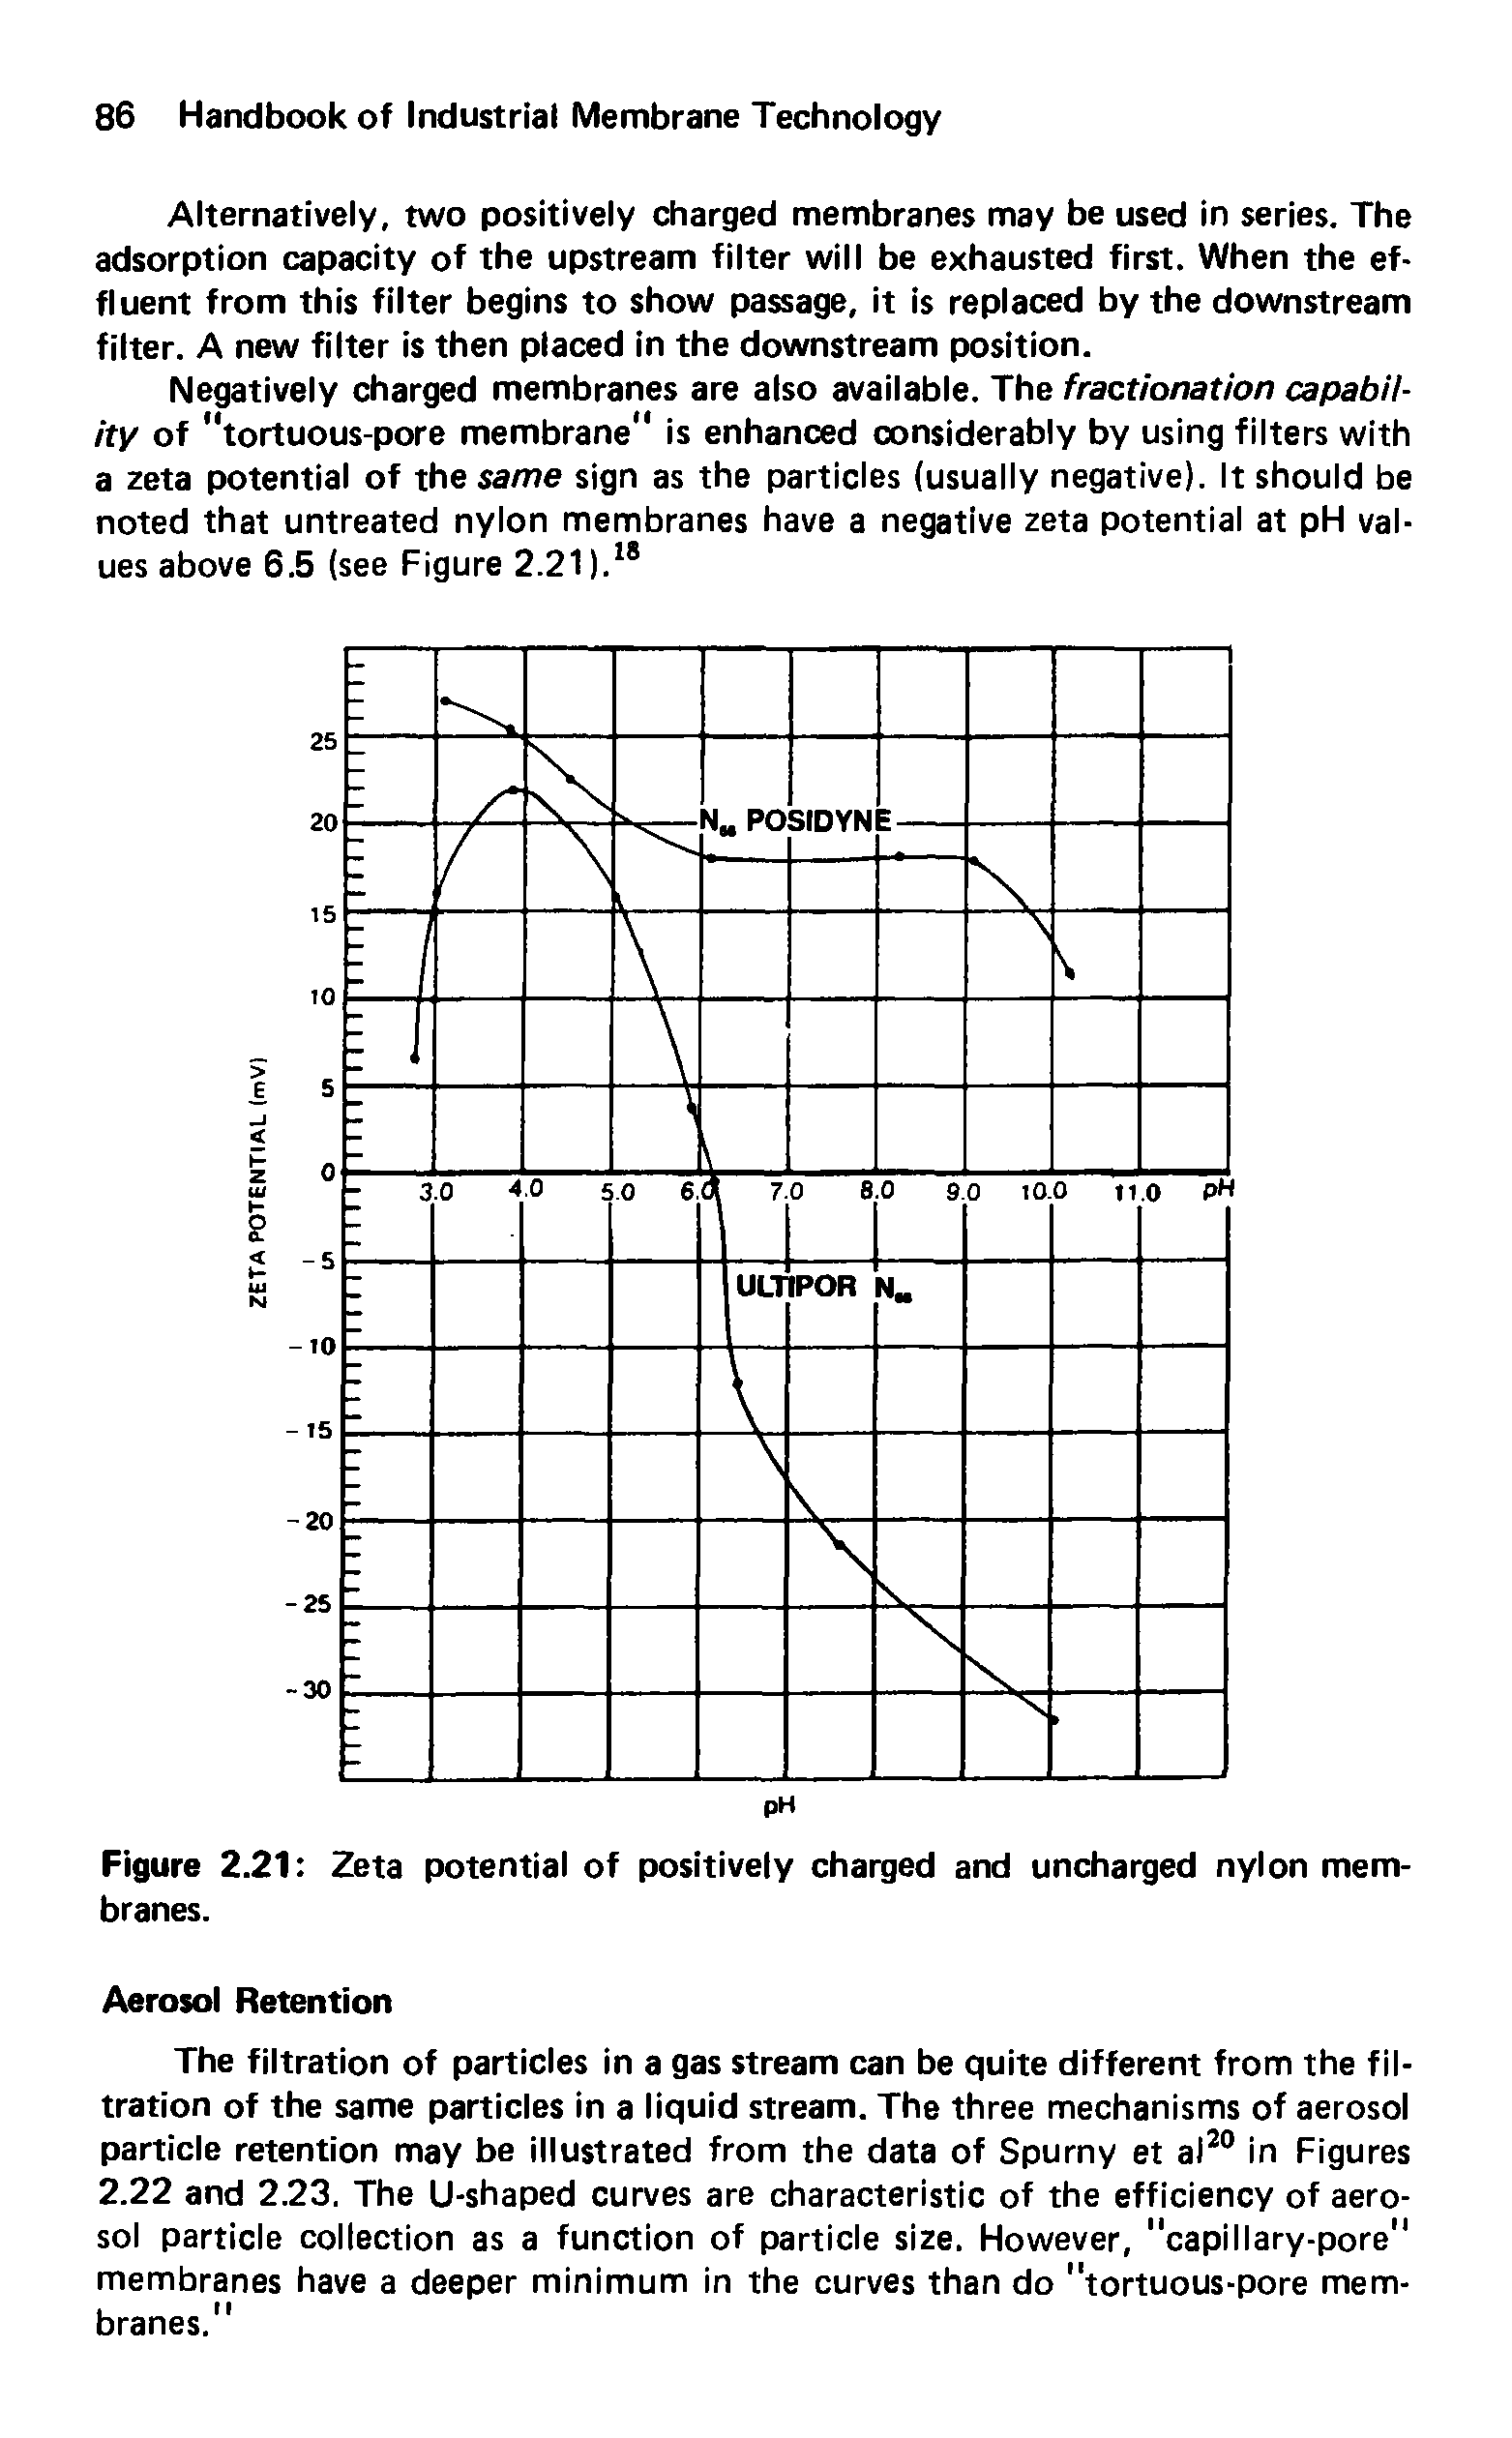 Figure 2.21 Zeta potential of positively charged and uncharged nylon membranes.